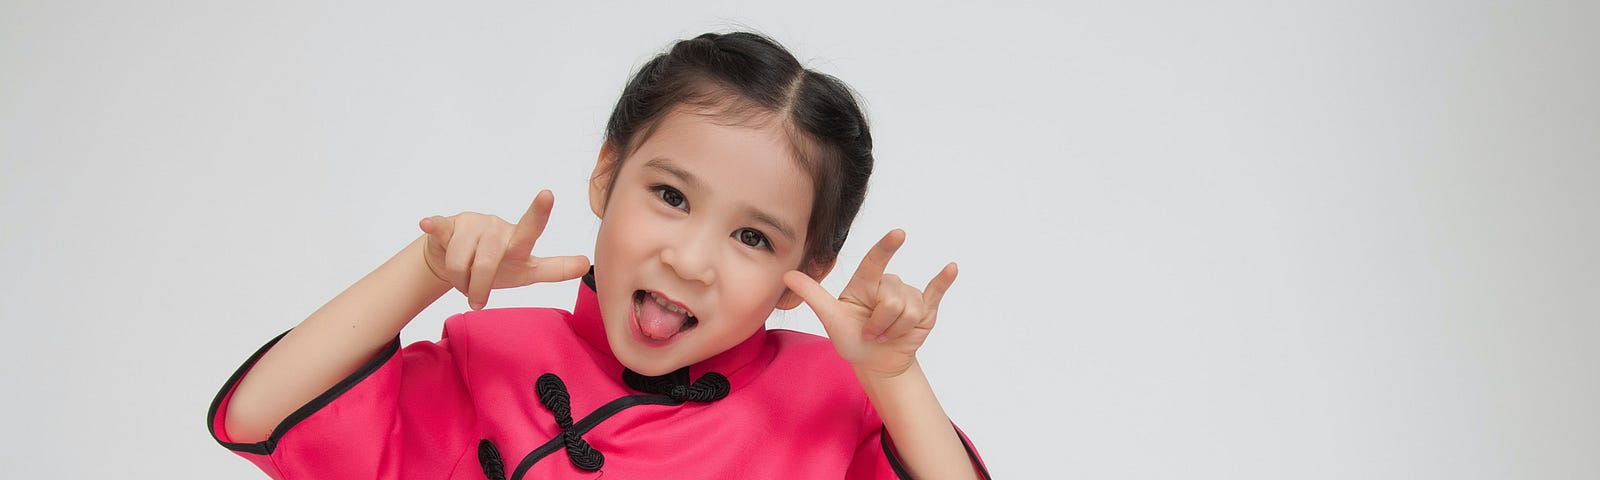 girl wearing pink dress sticking tongue out with hand gestures